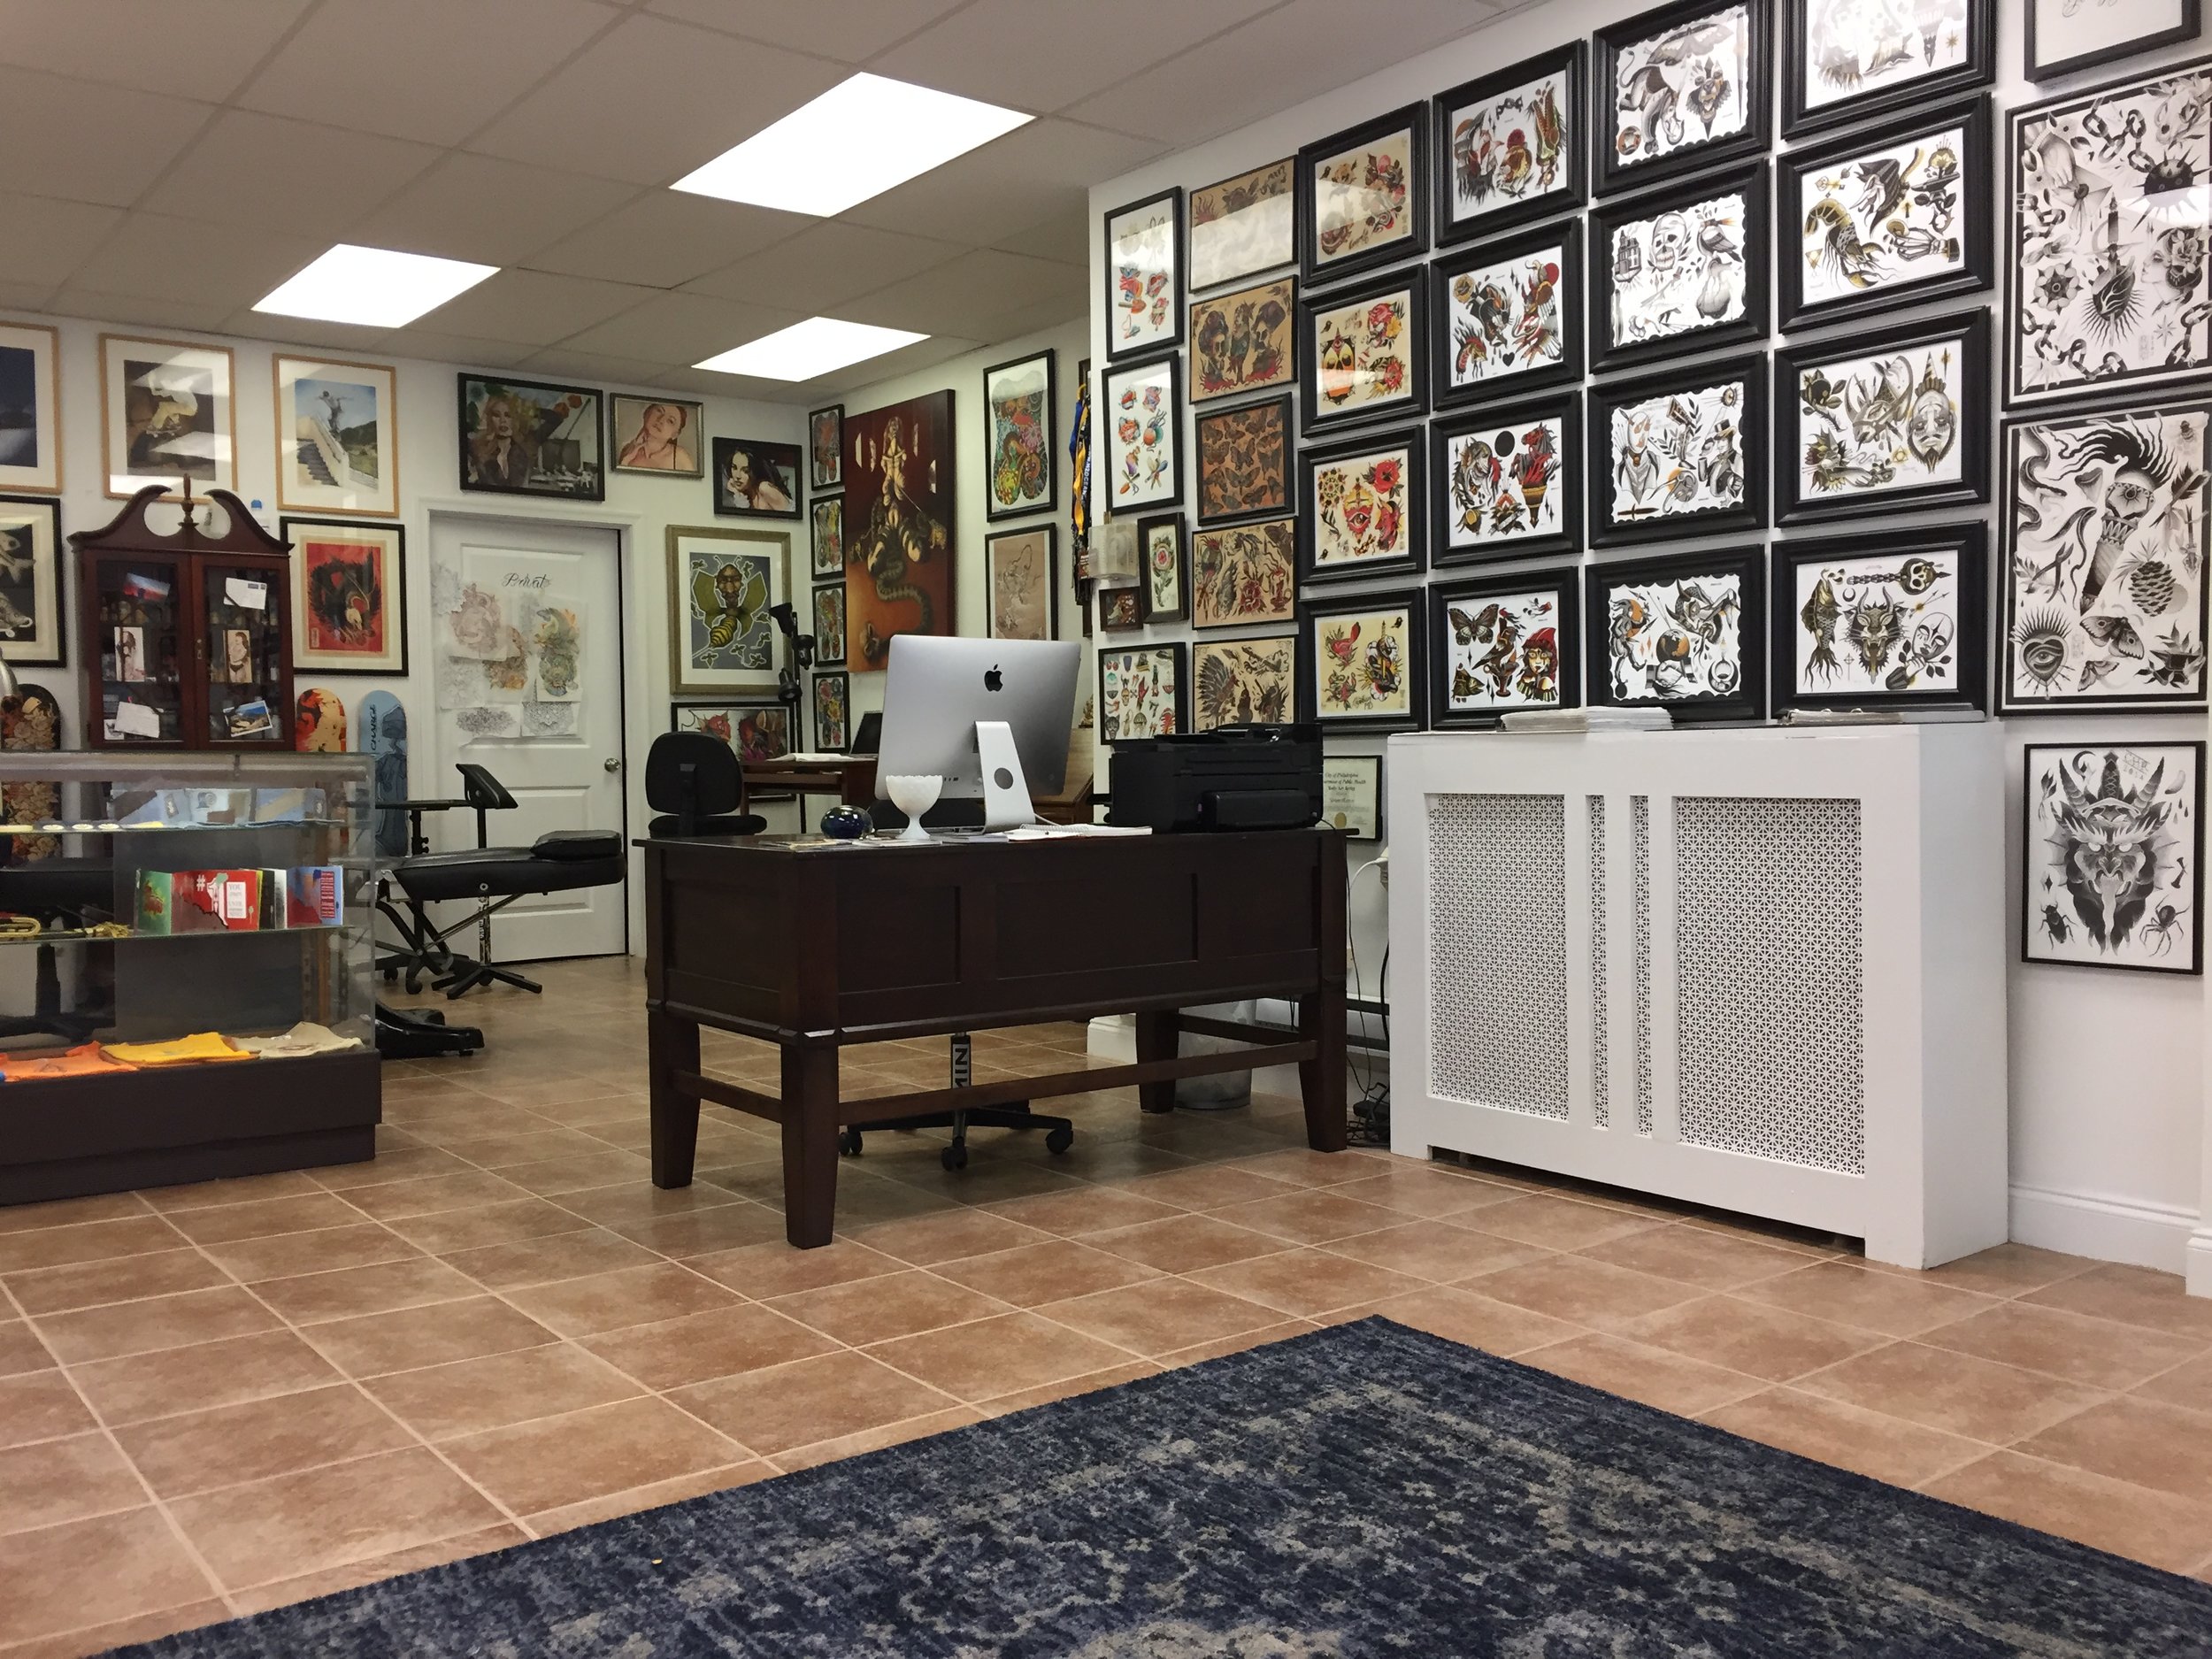 Black Moth Tattoo and Gallery